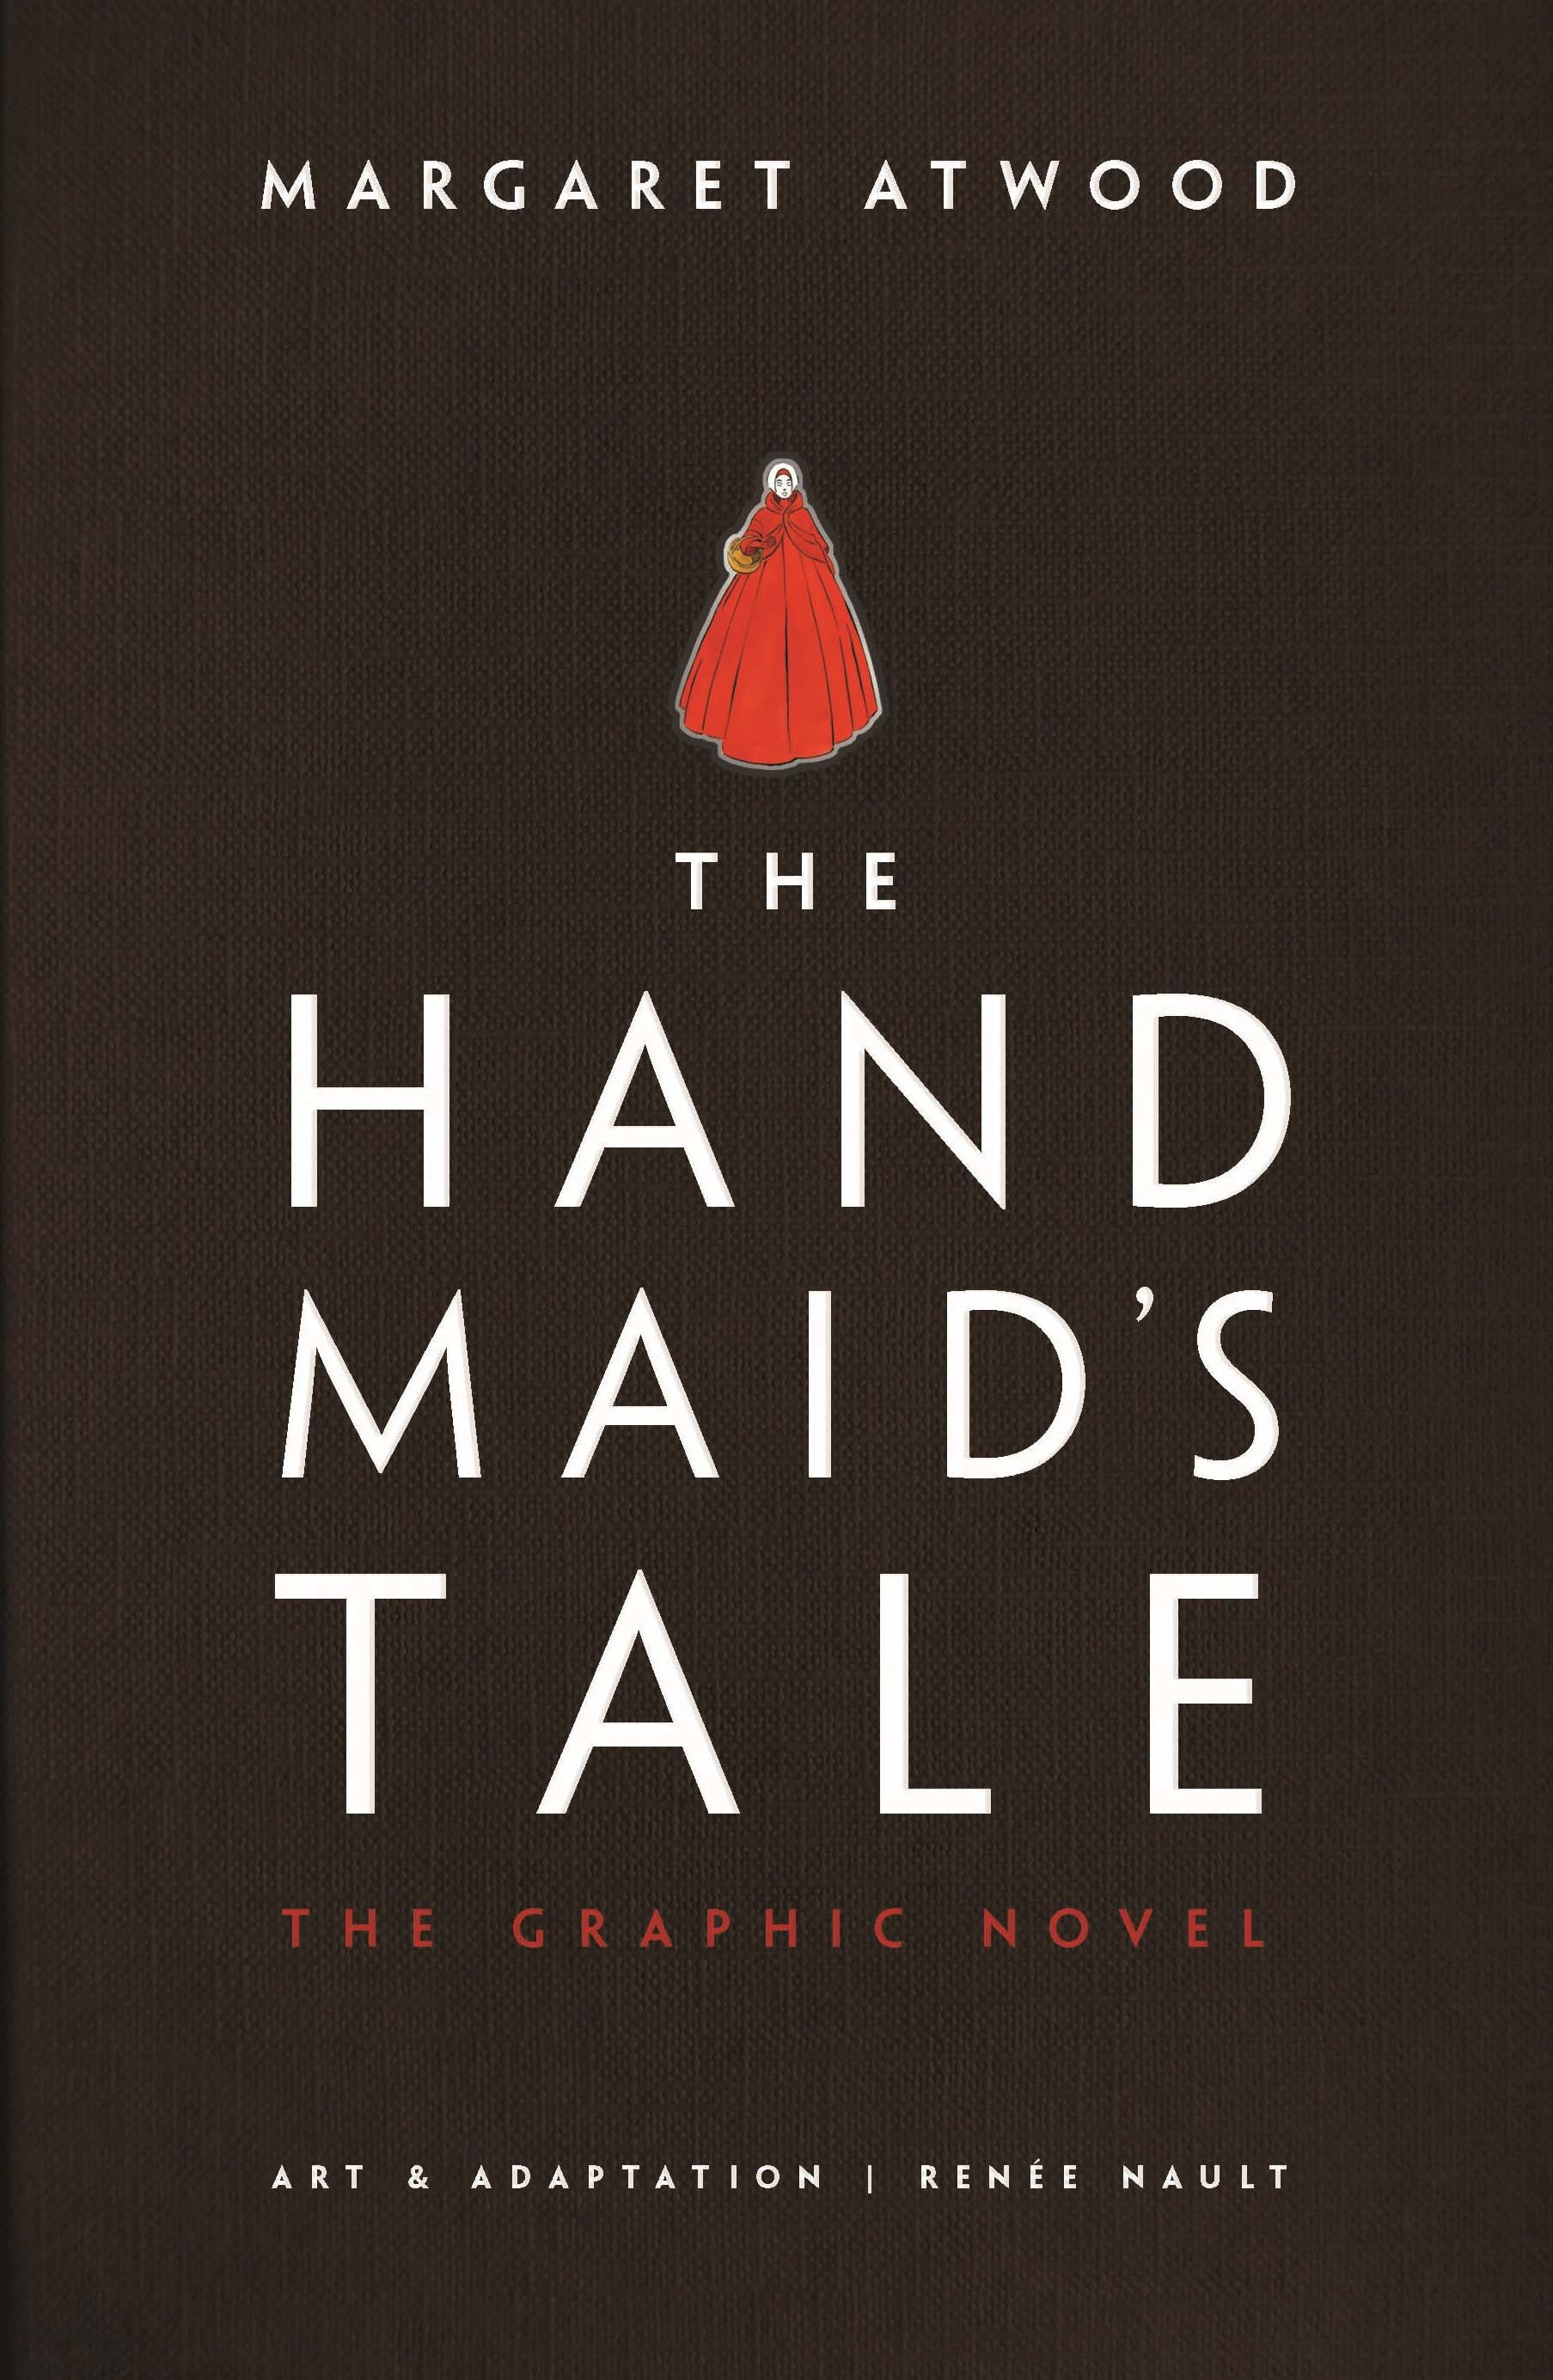 Book “The Handmaid's Tale” by Margaret Atwood — March 26, 2019